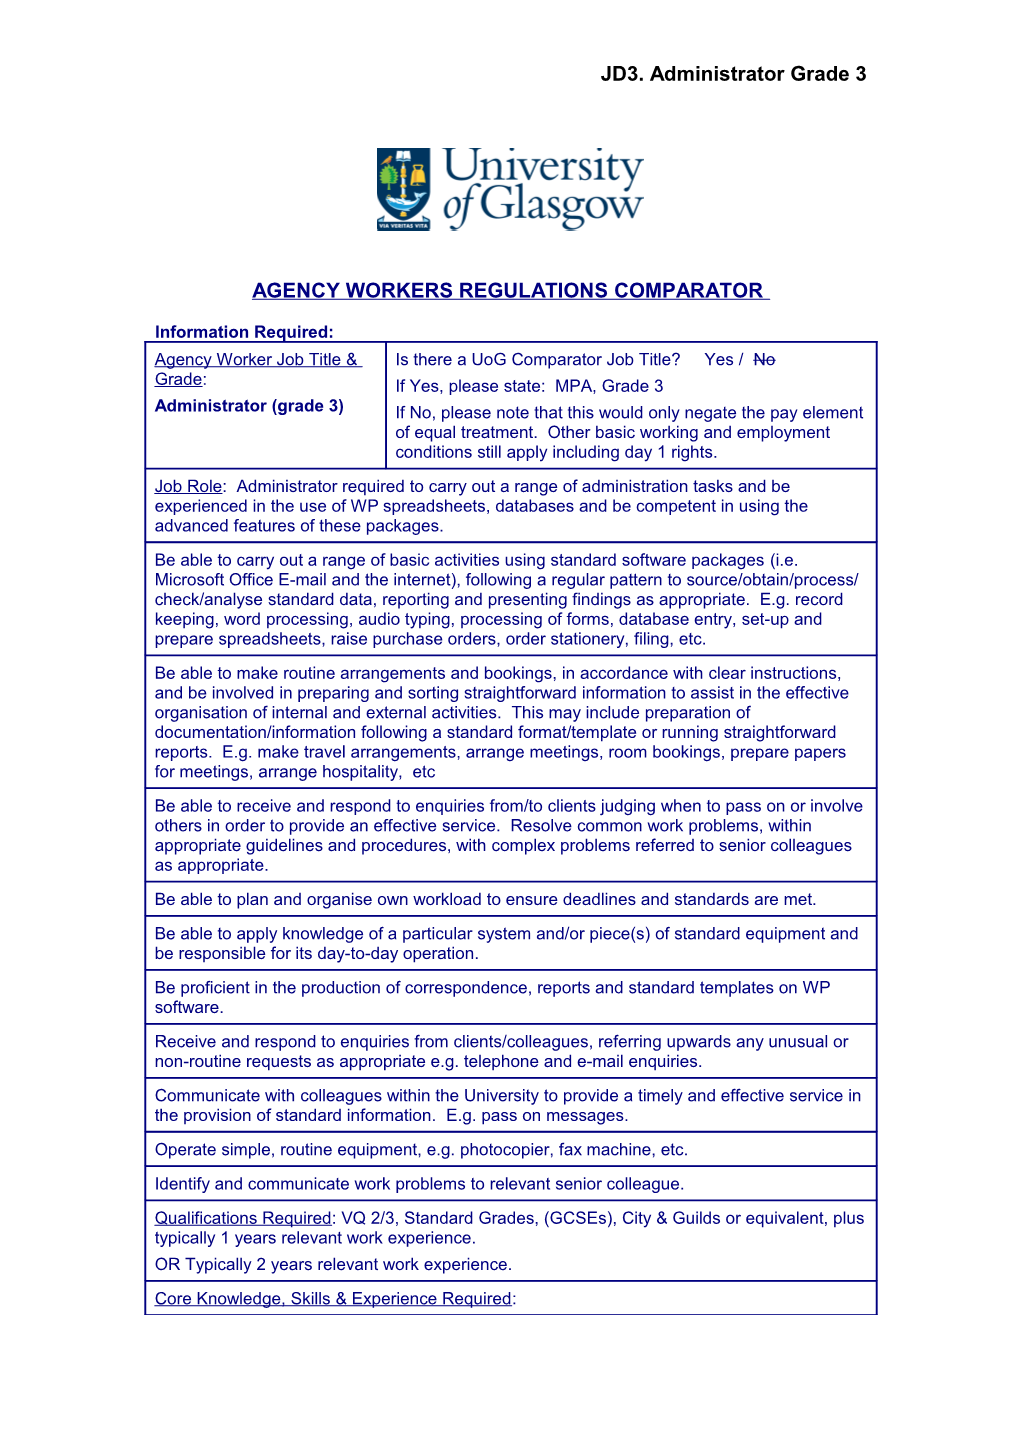 Agency Workers Regulations Comparator Checklist